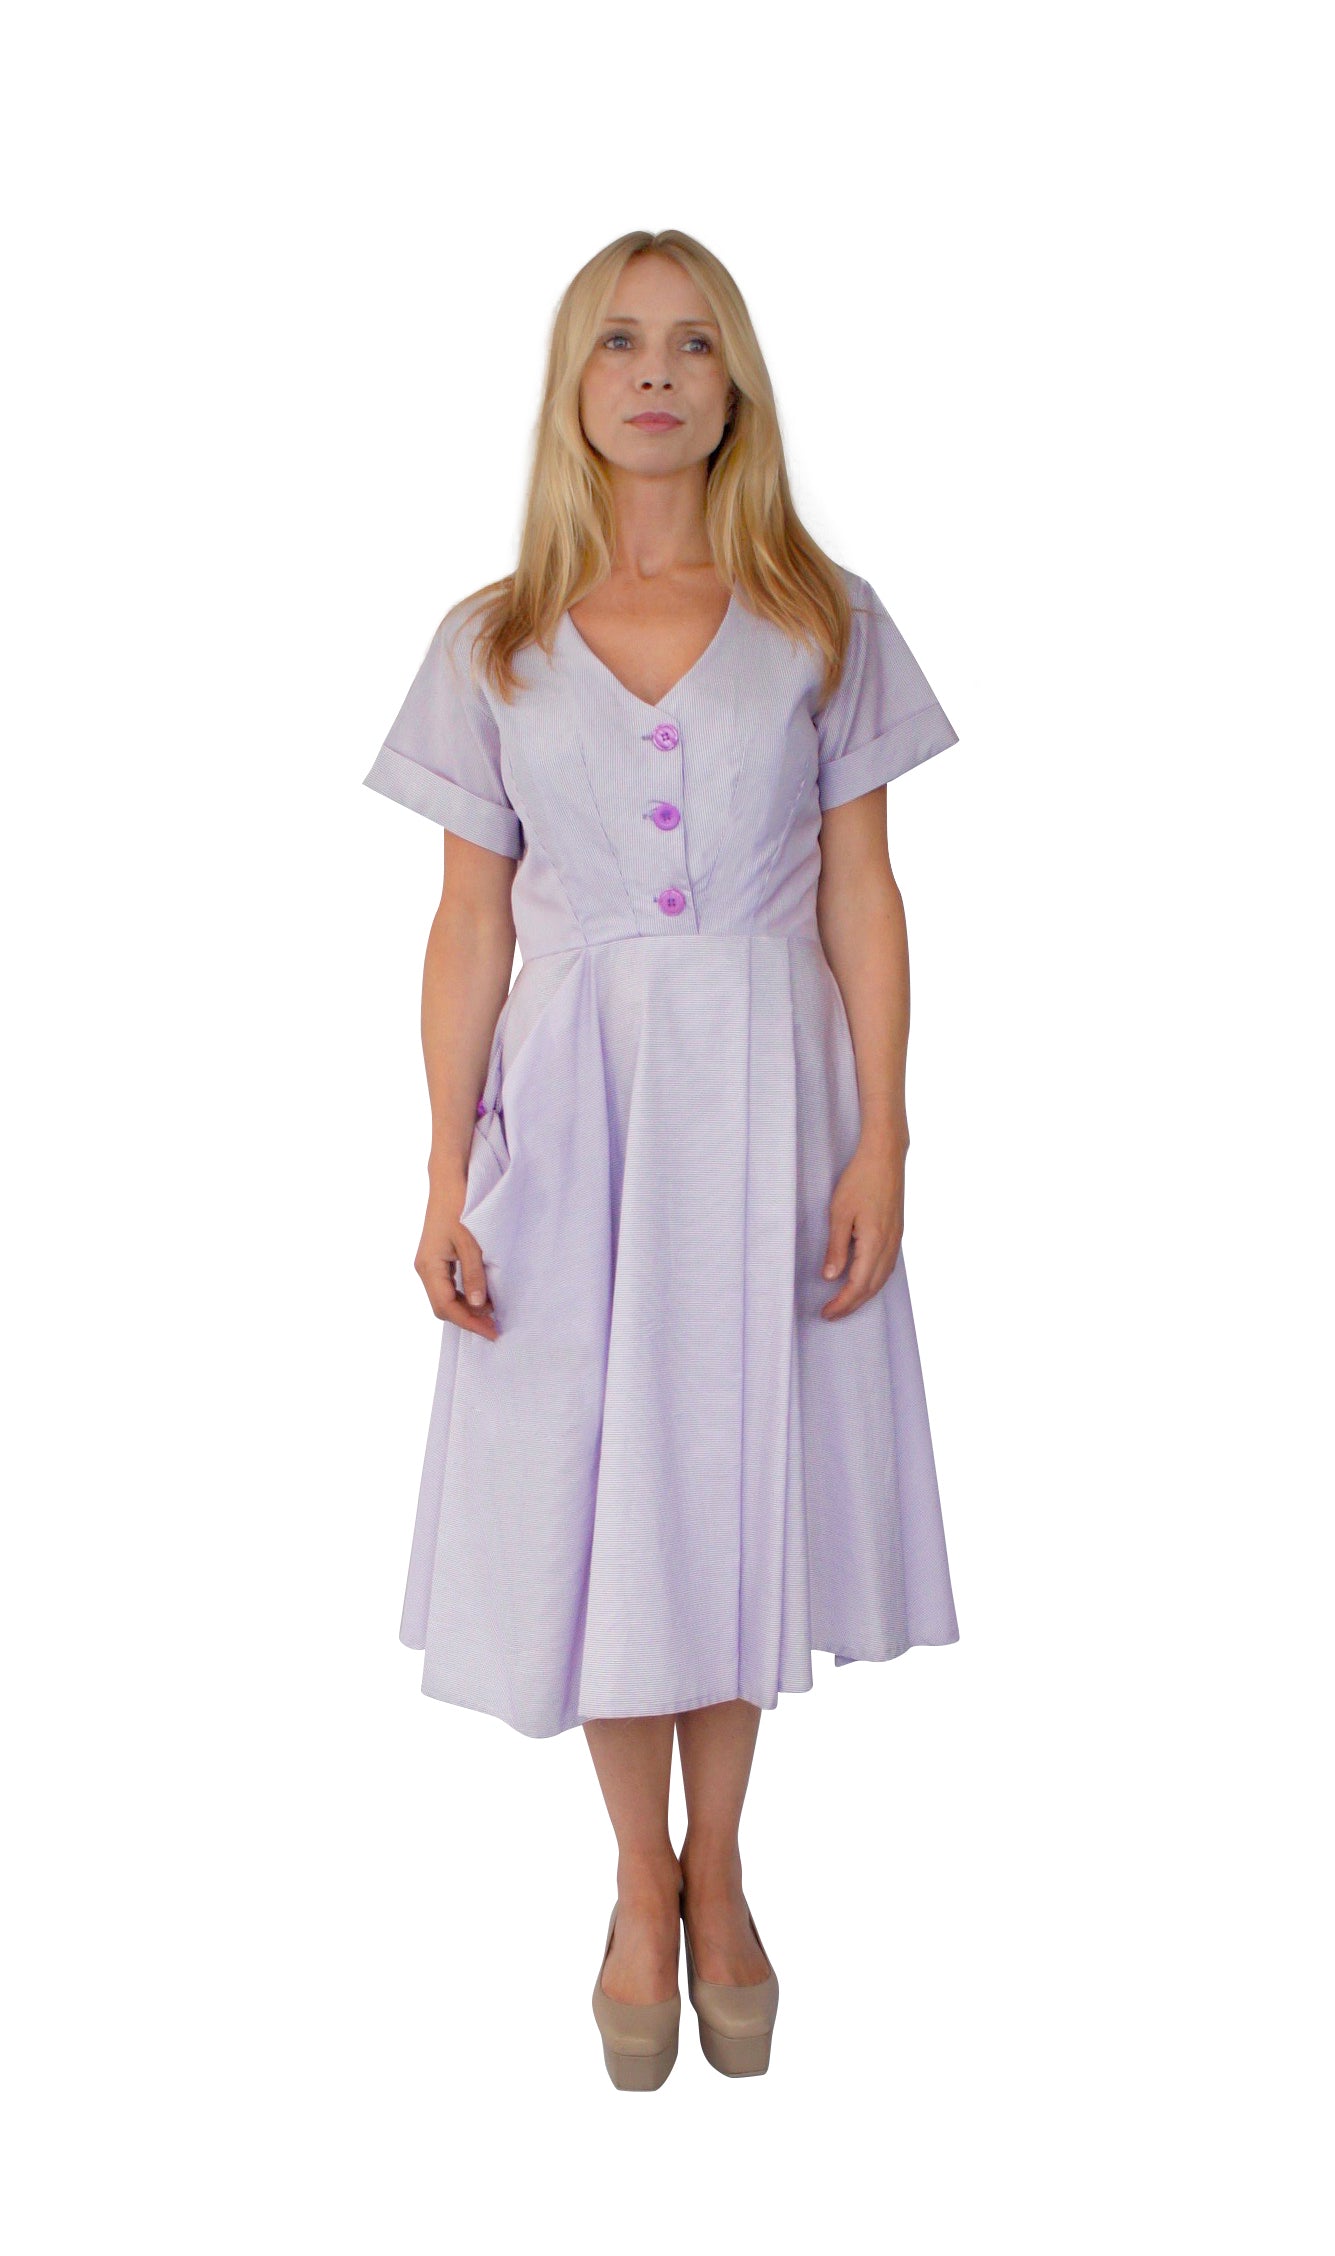 50 s style Cotton shirting dress,Day summer dress,Dress with pocket